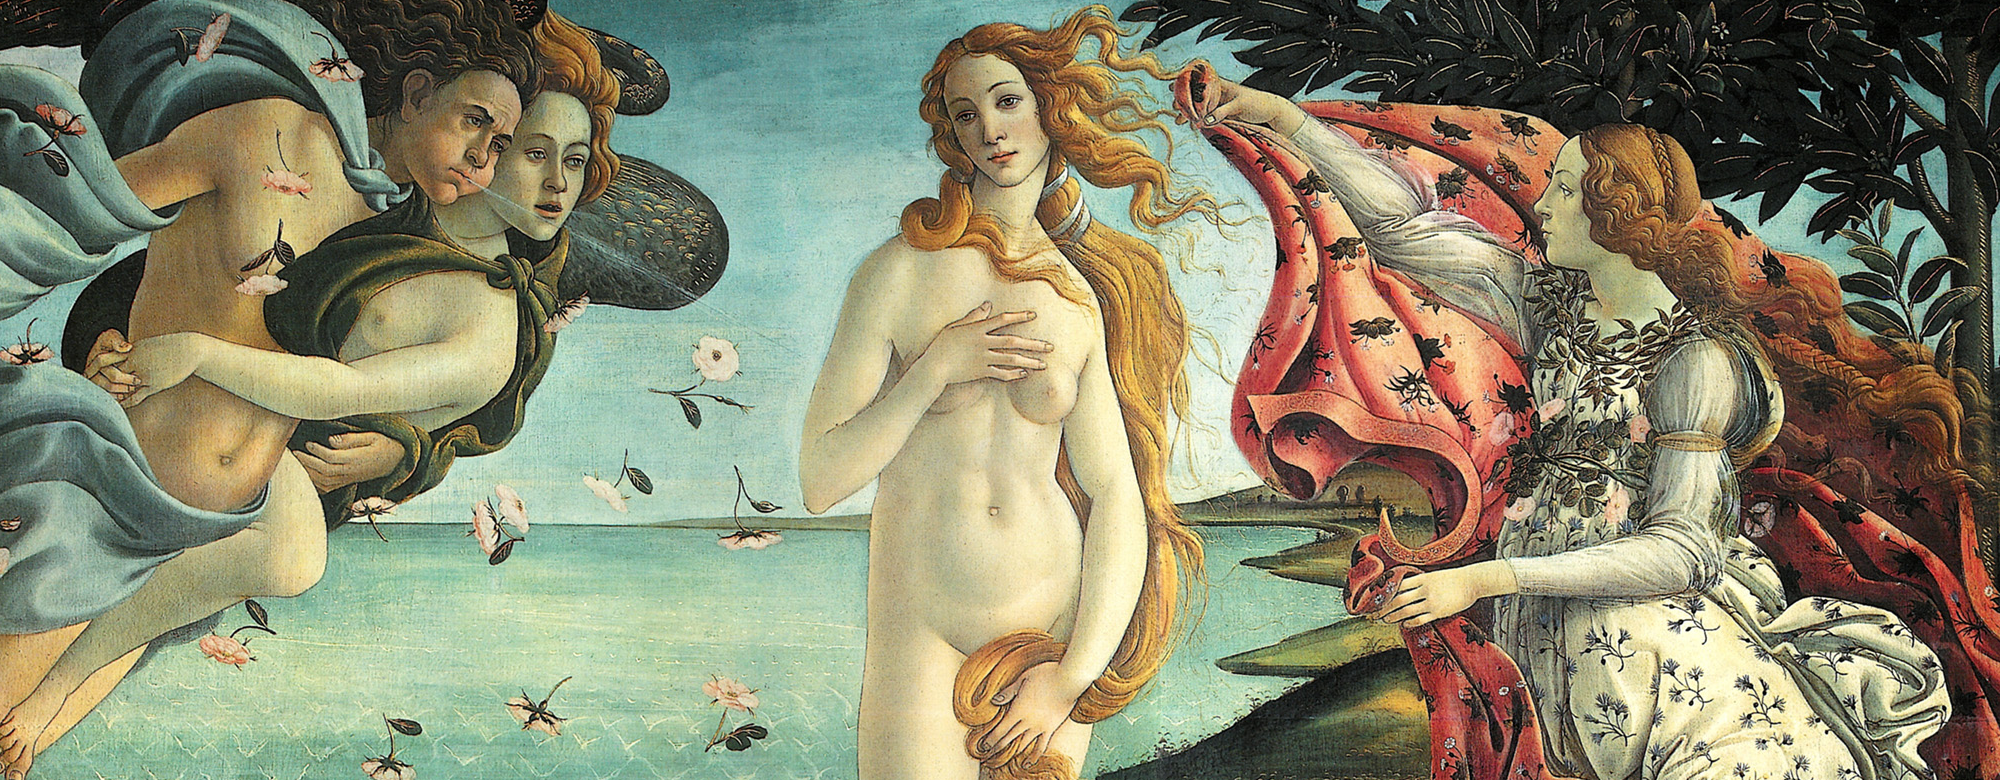 The goddess Venus arrives at the shore after her birth, when she had emerged from the sea fully-grown.